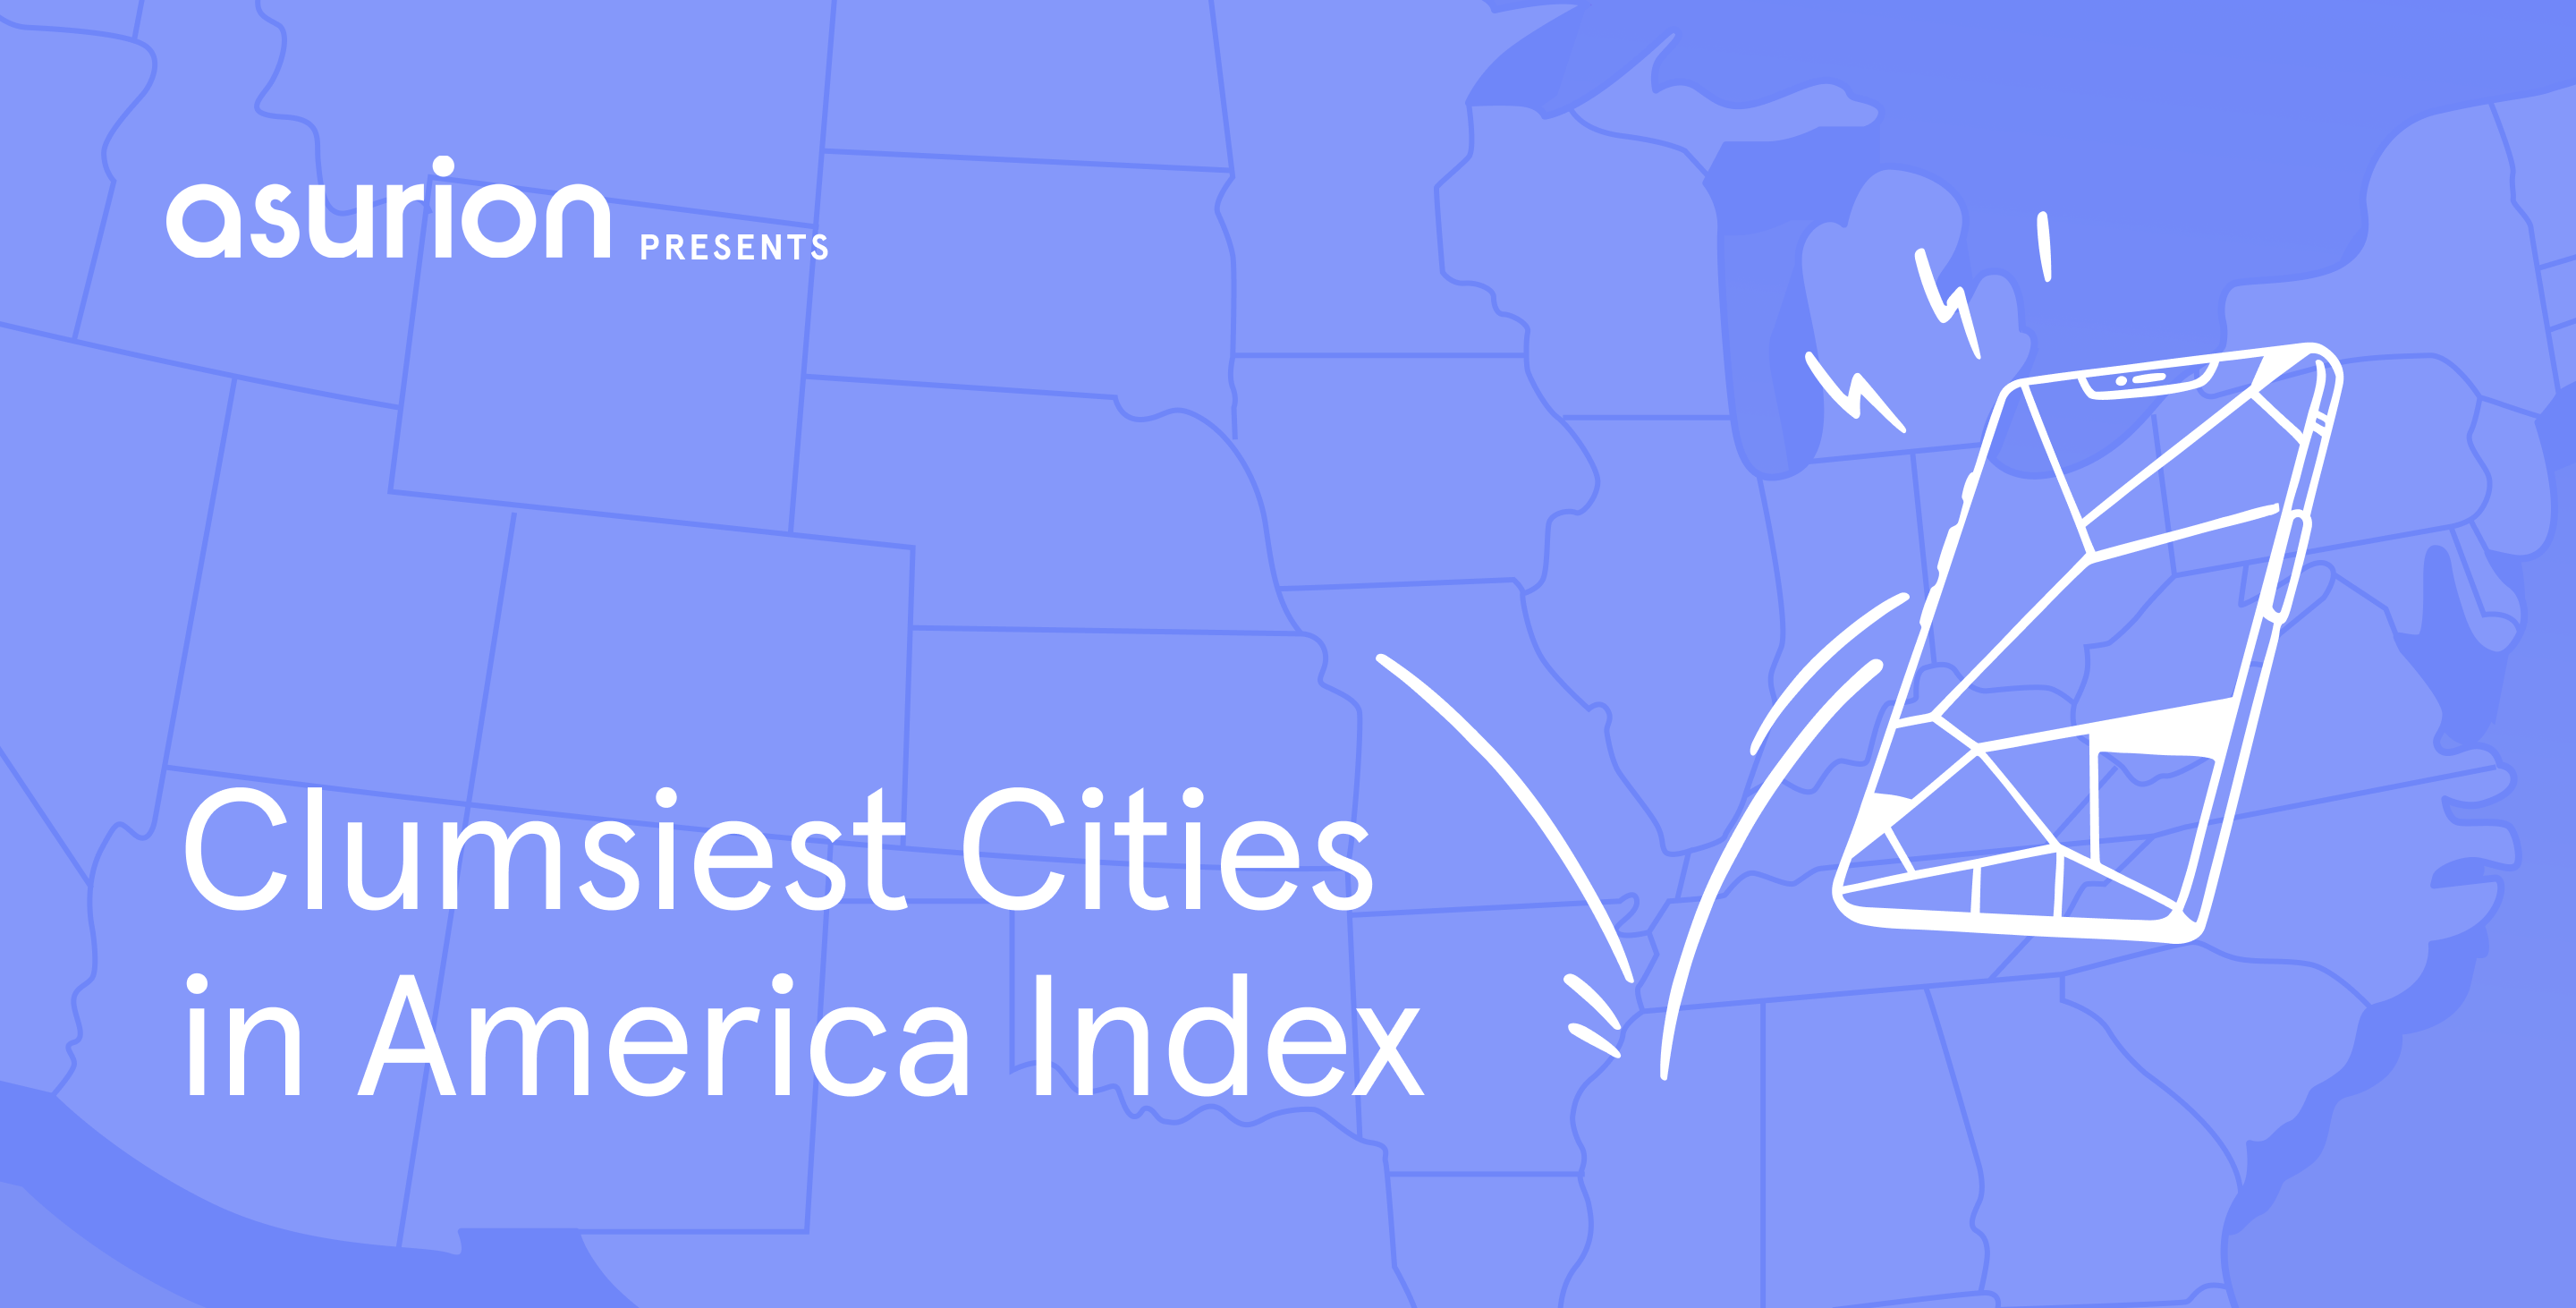 Clumsiest Cities in America Index. The index offers insights into which cities see the most and least stumbles and slips—and why these happen. 